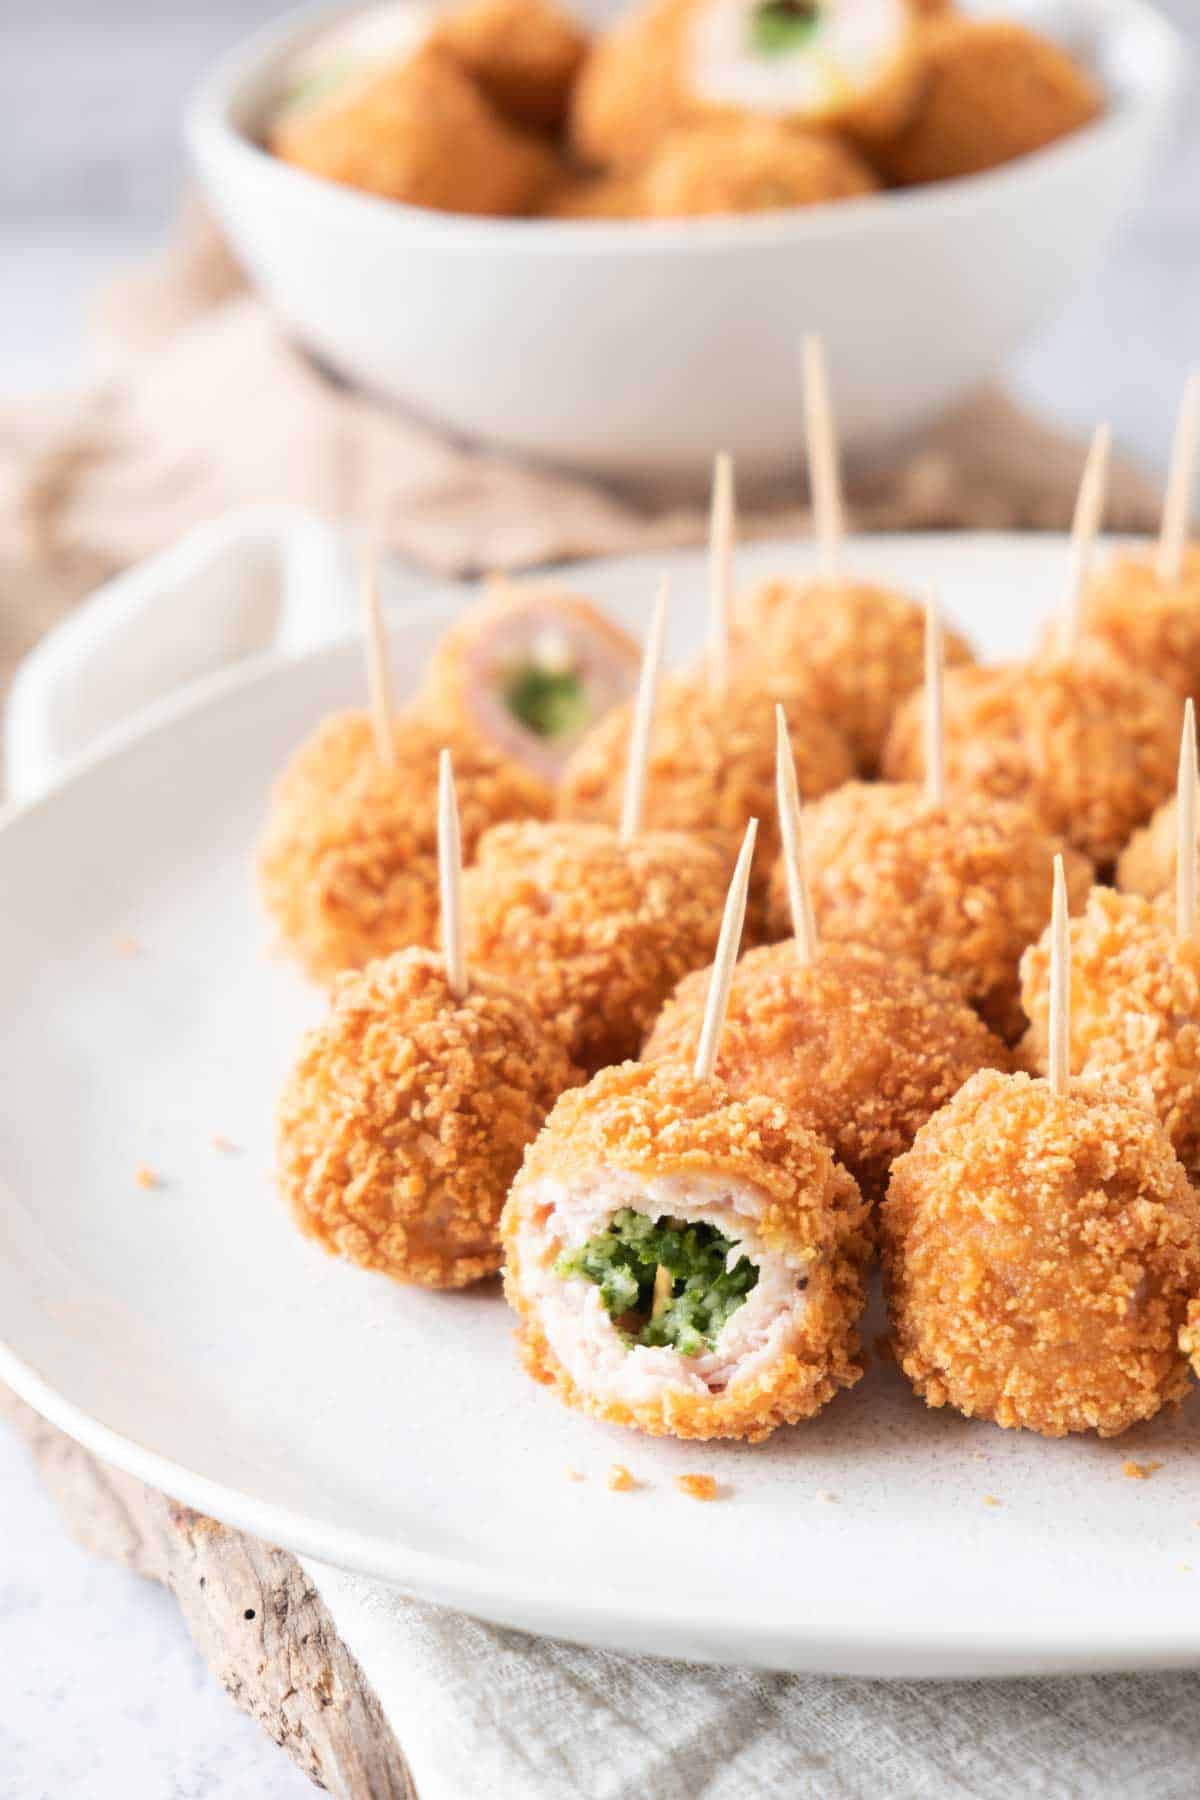 Fried chicken bites on a plate with toothpicks.